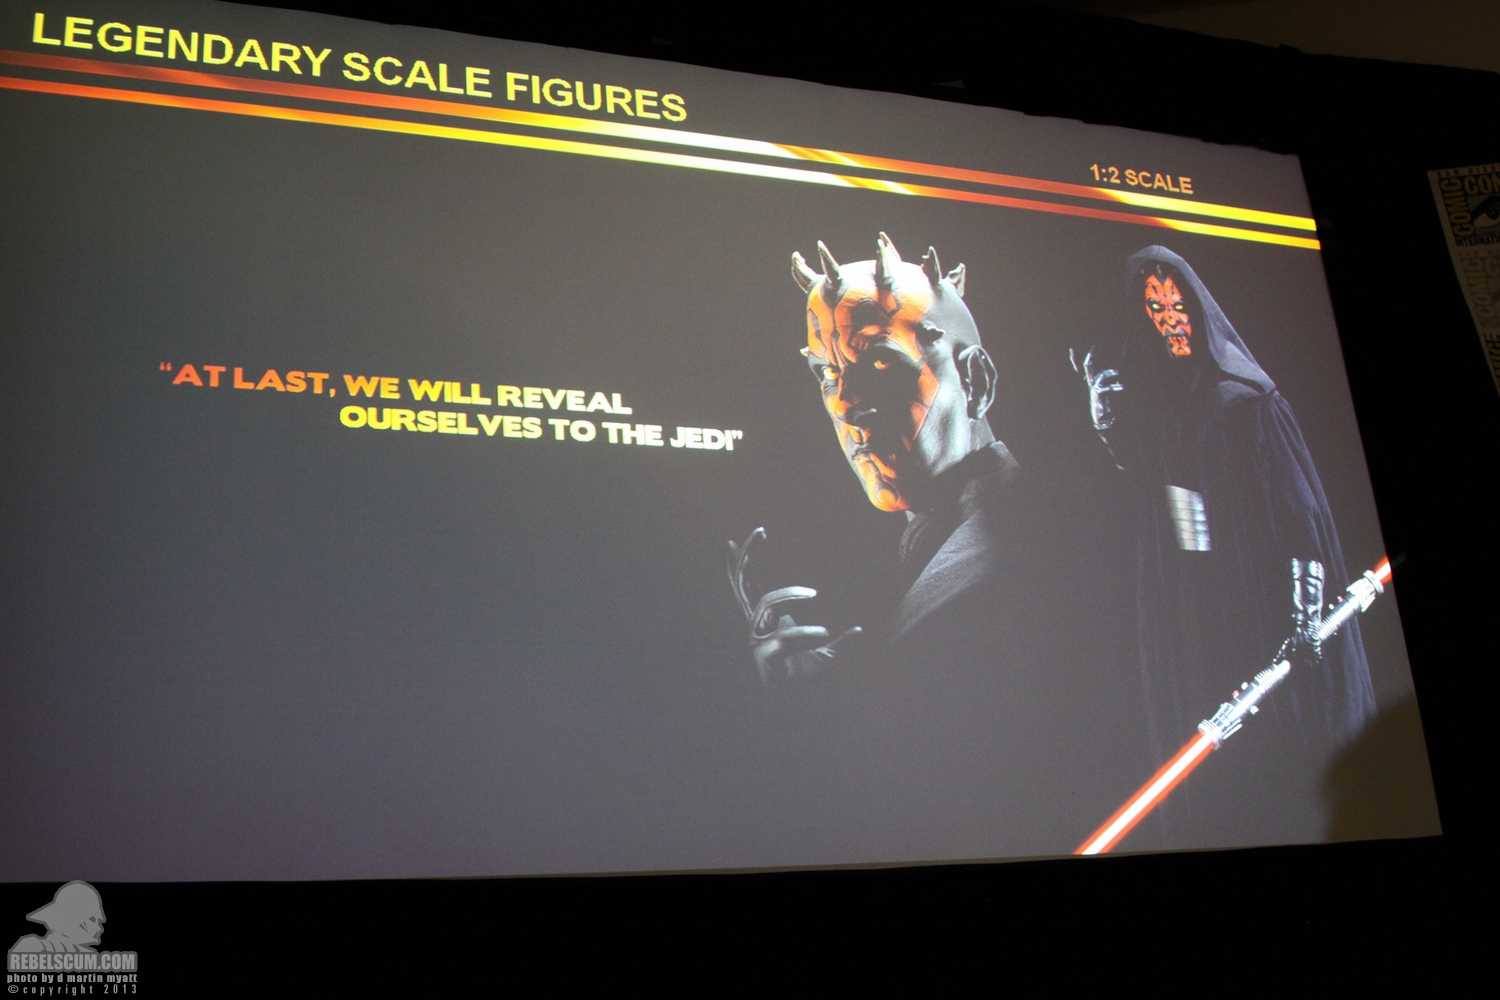 SDCC_2013_Star_Wars_Collecting_Panel_Friday-170.jpg